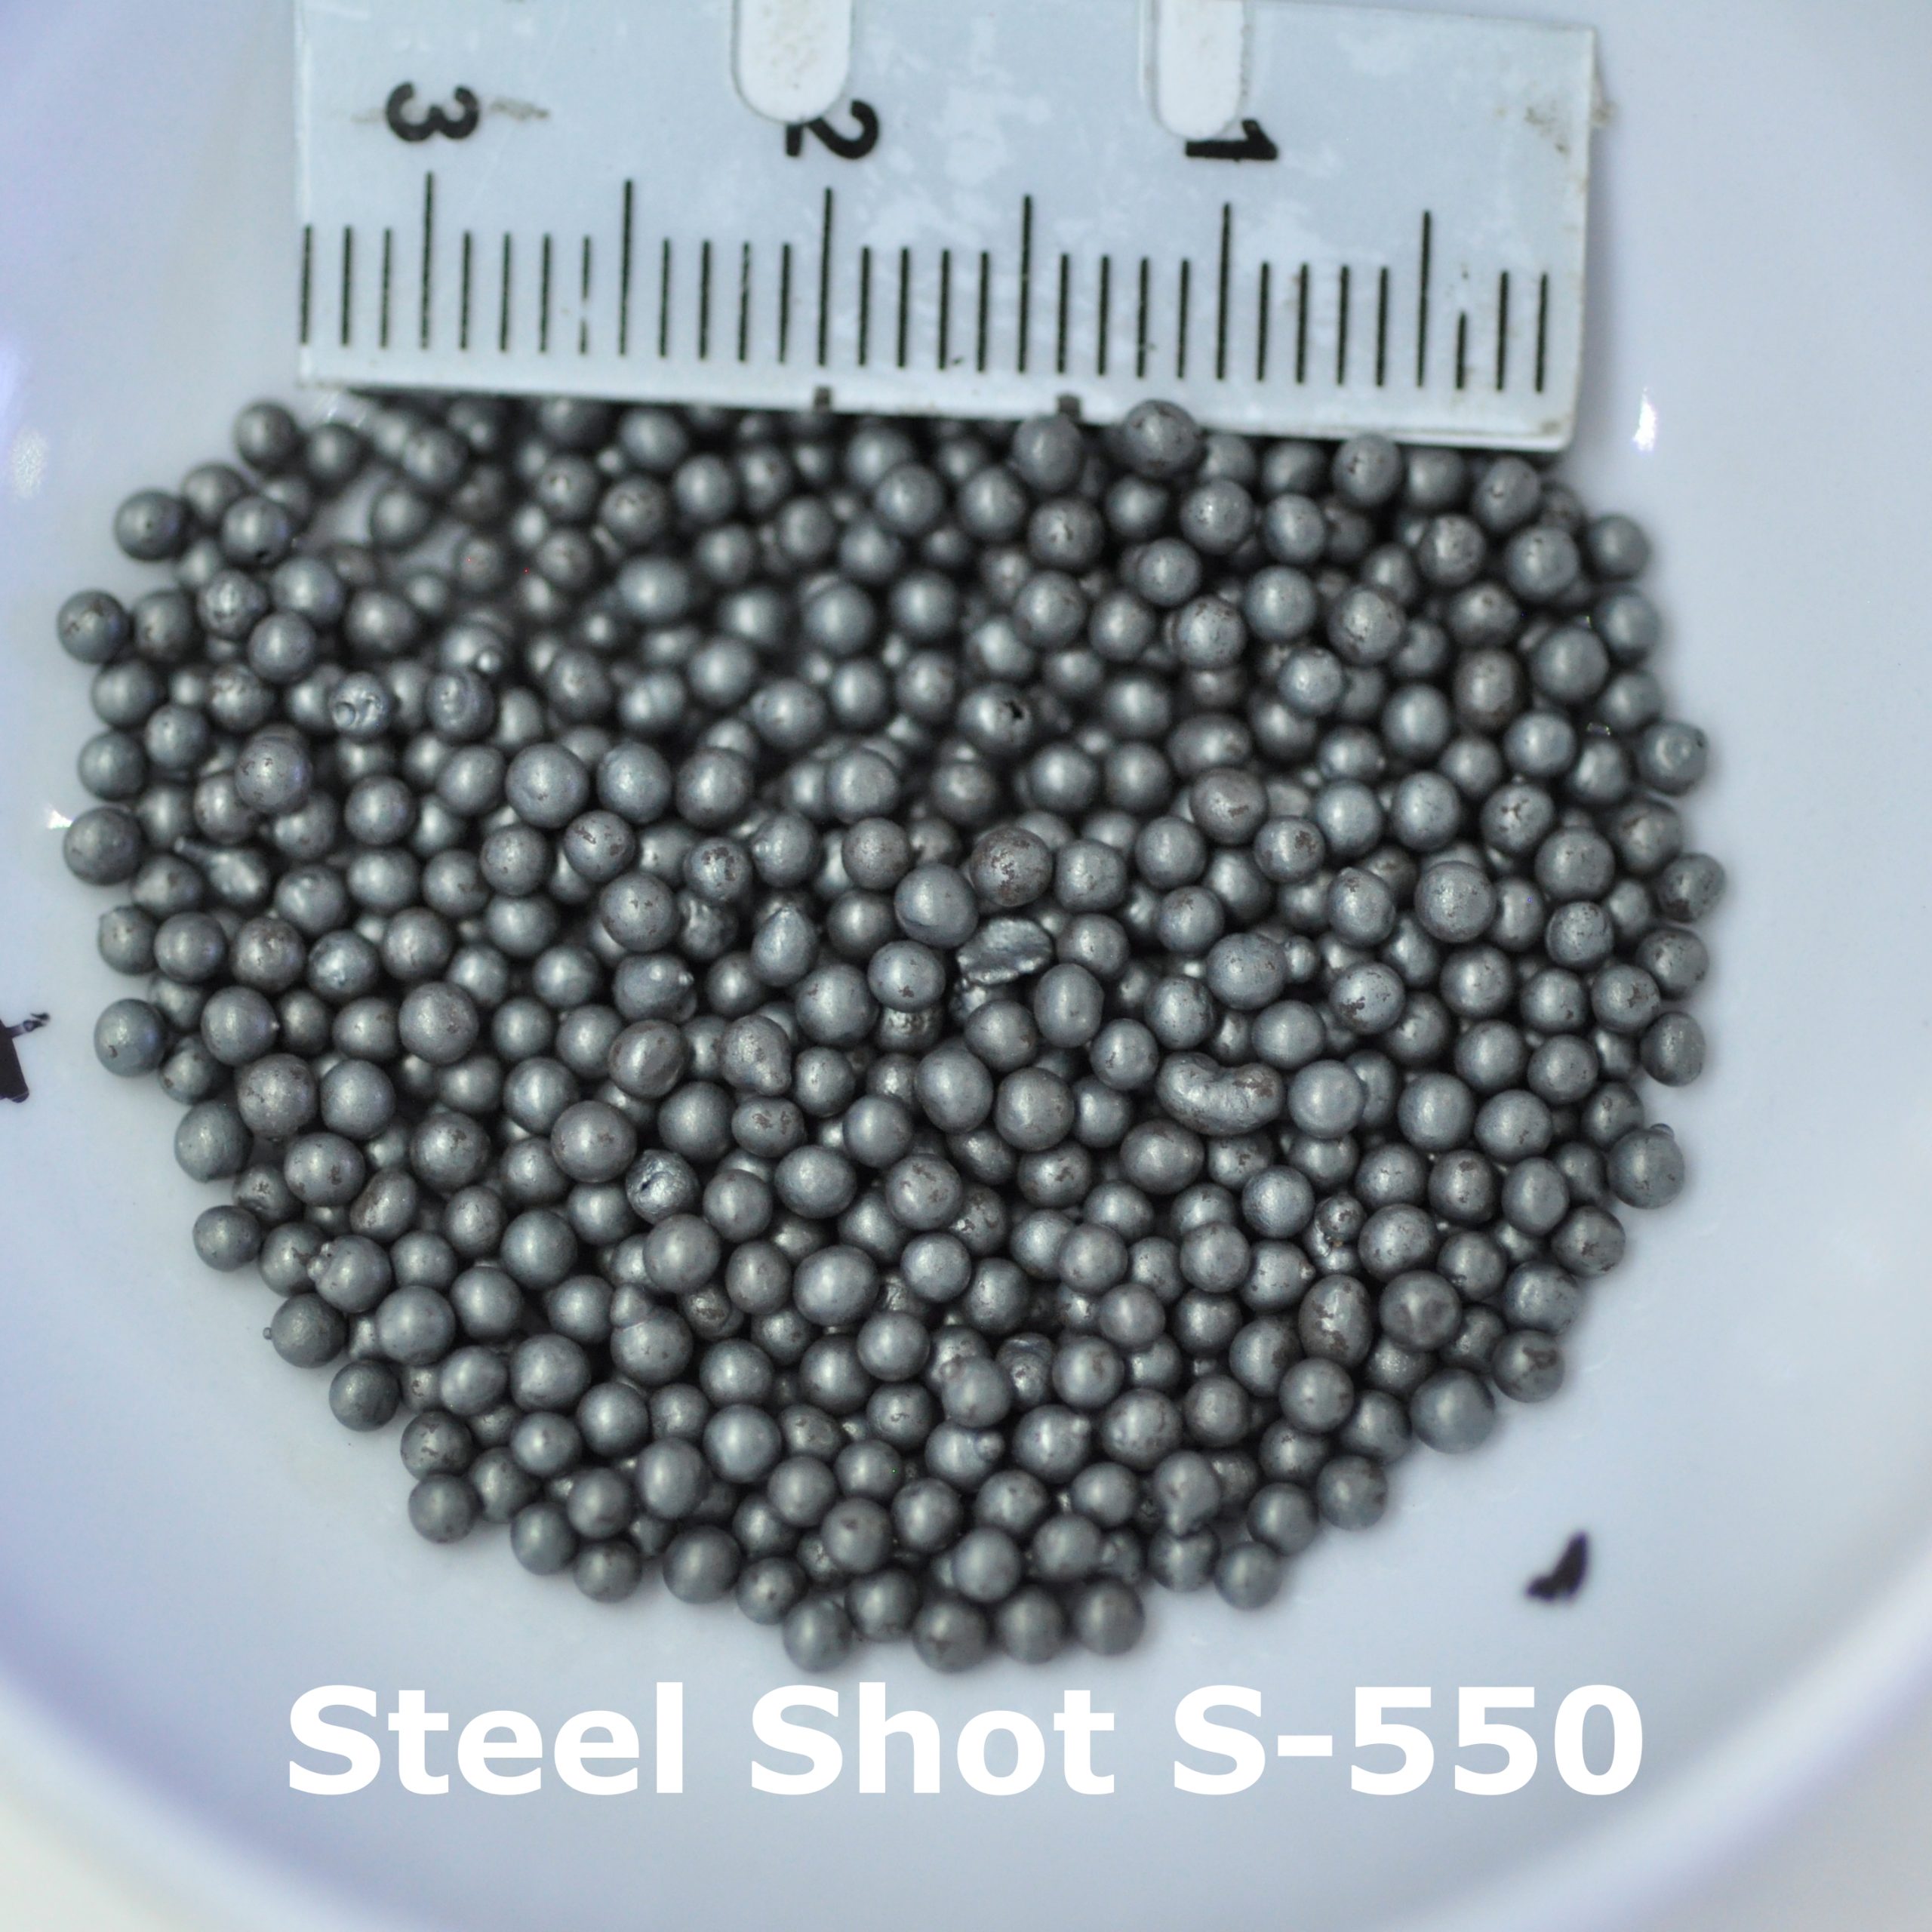 S-550/SH-170
Size 1.70mm